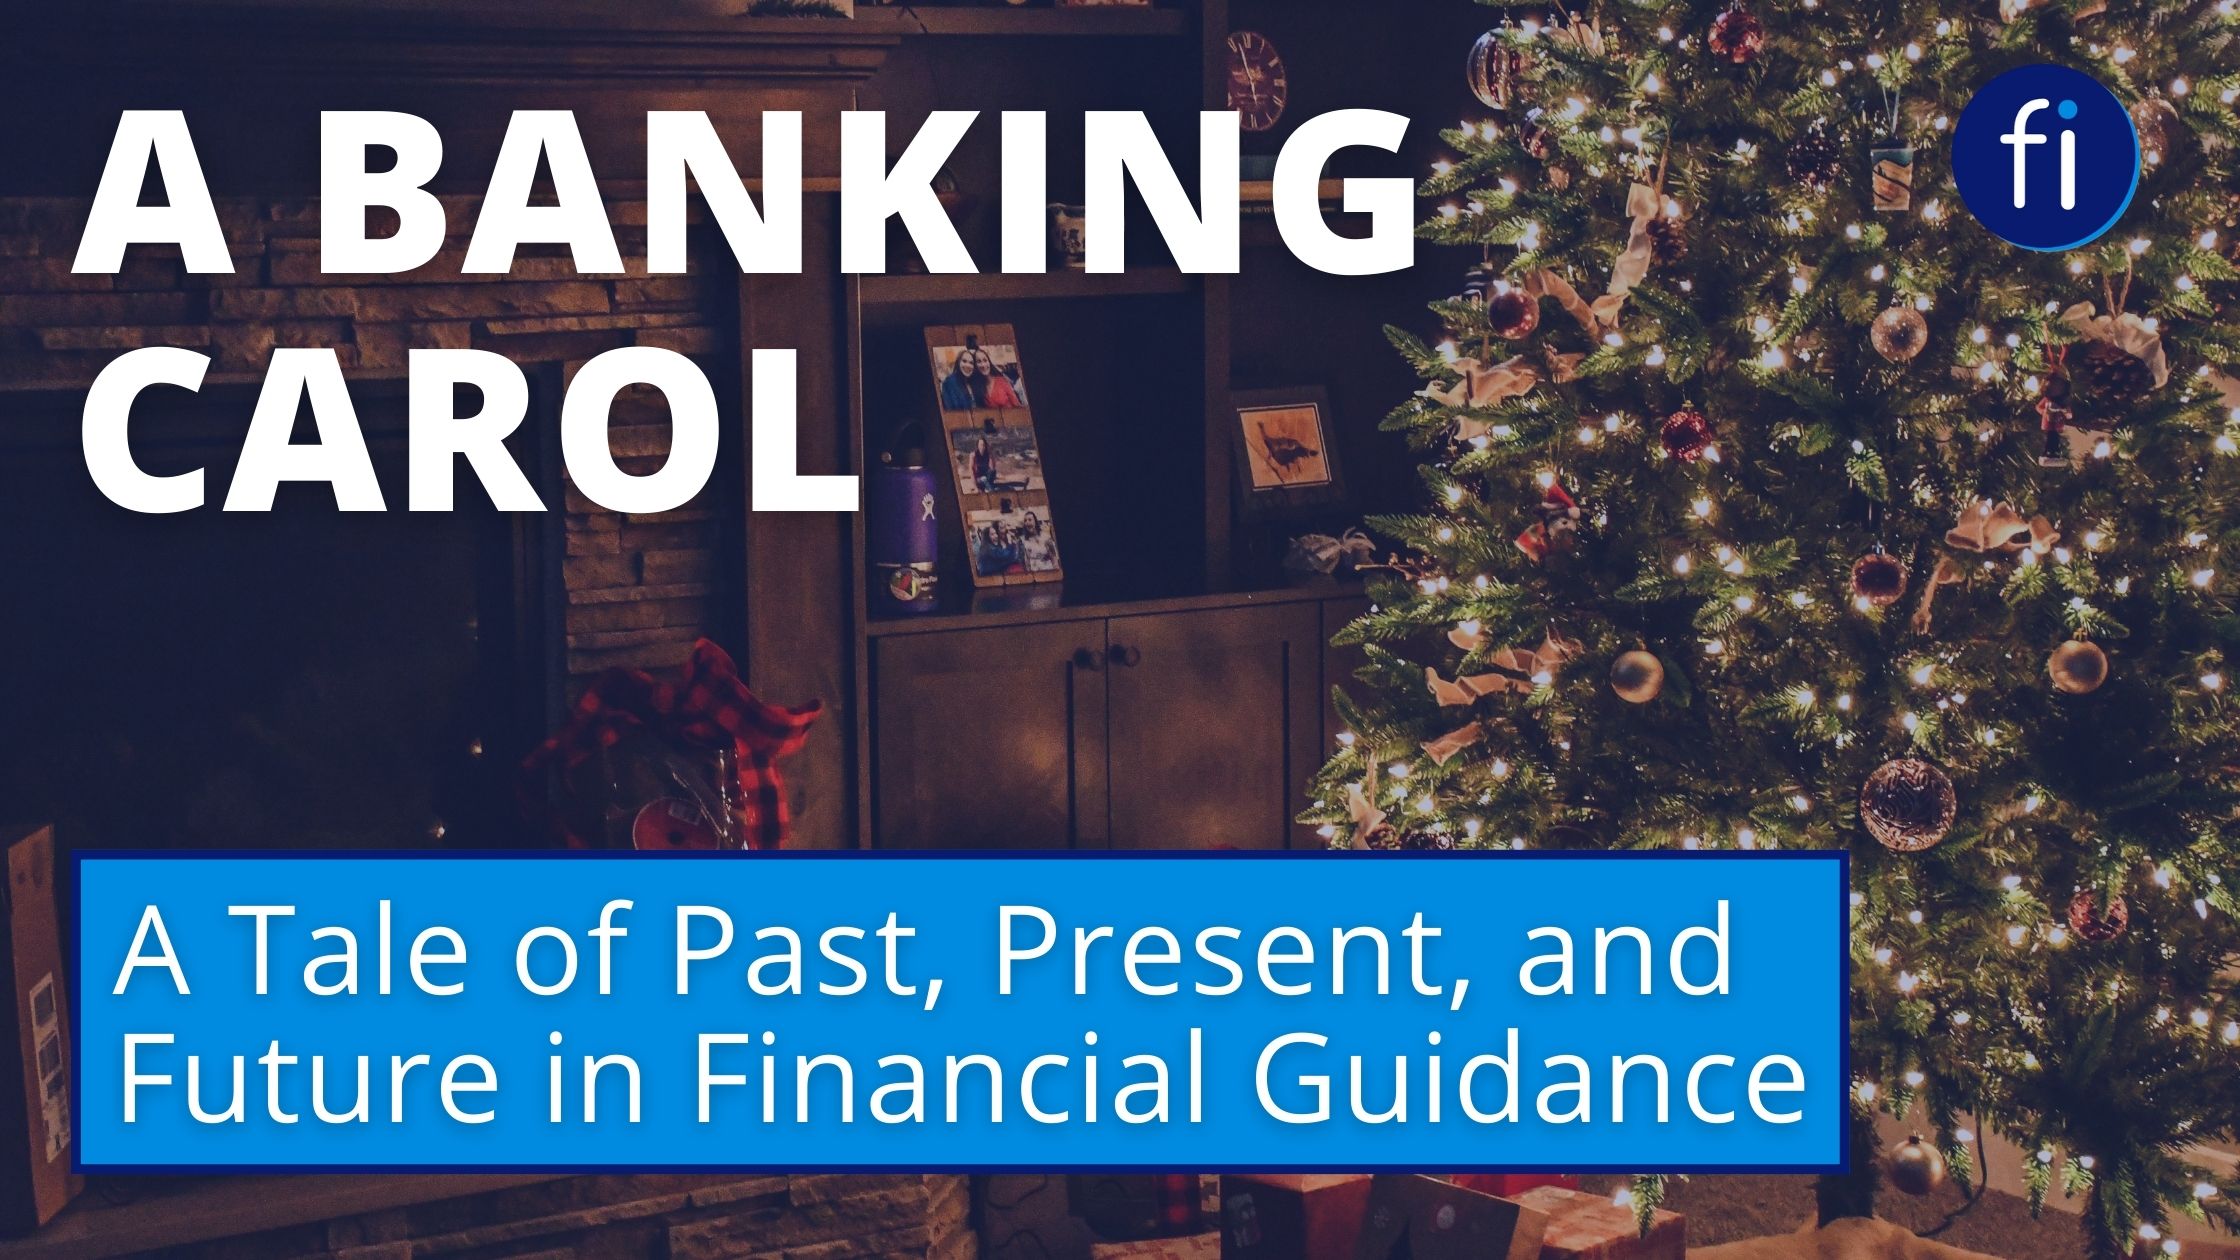 A Banking Carol: A Tale of Past, Present, and Future in Financial Guidance